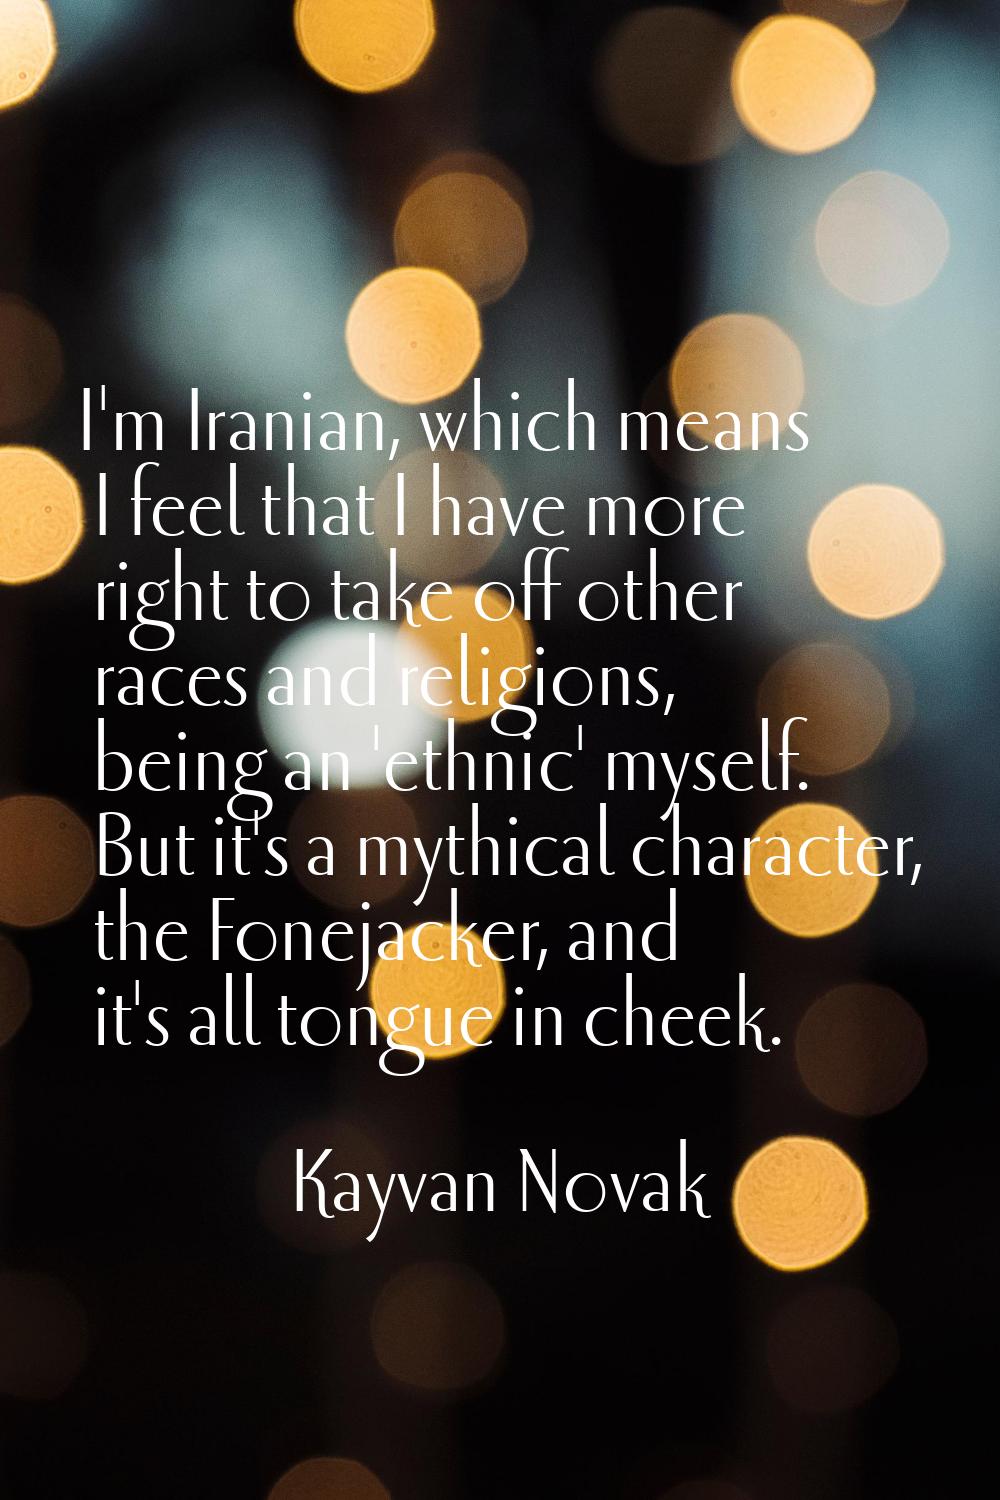 I'm Iranian, which means I feel that I have more right to take off other races and religions, being